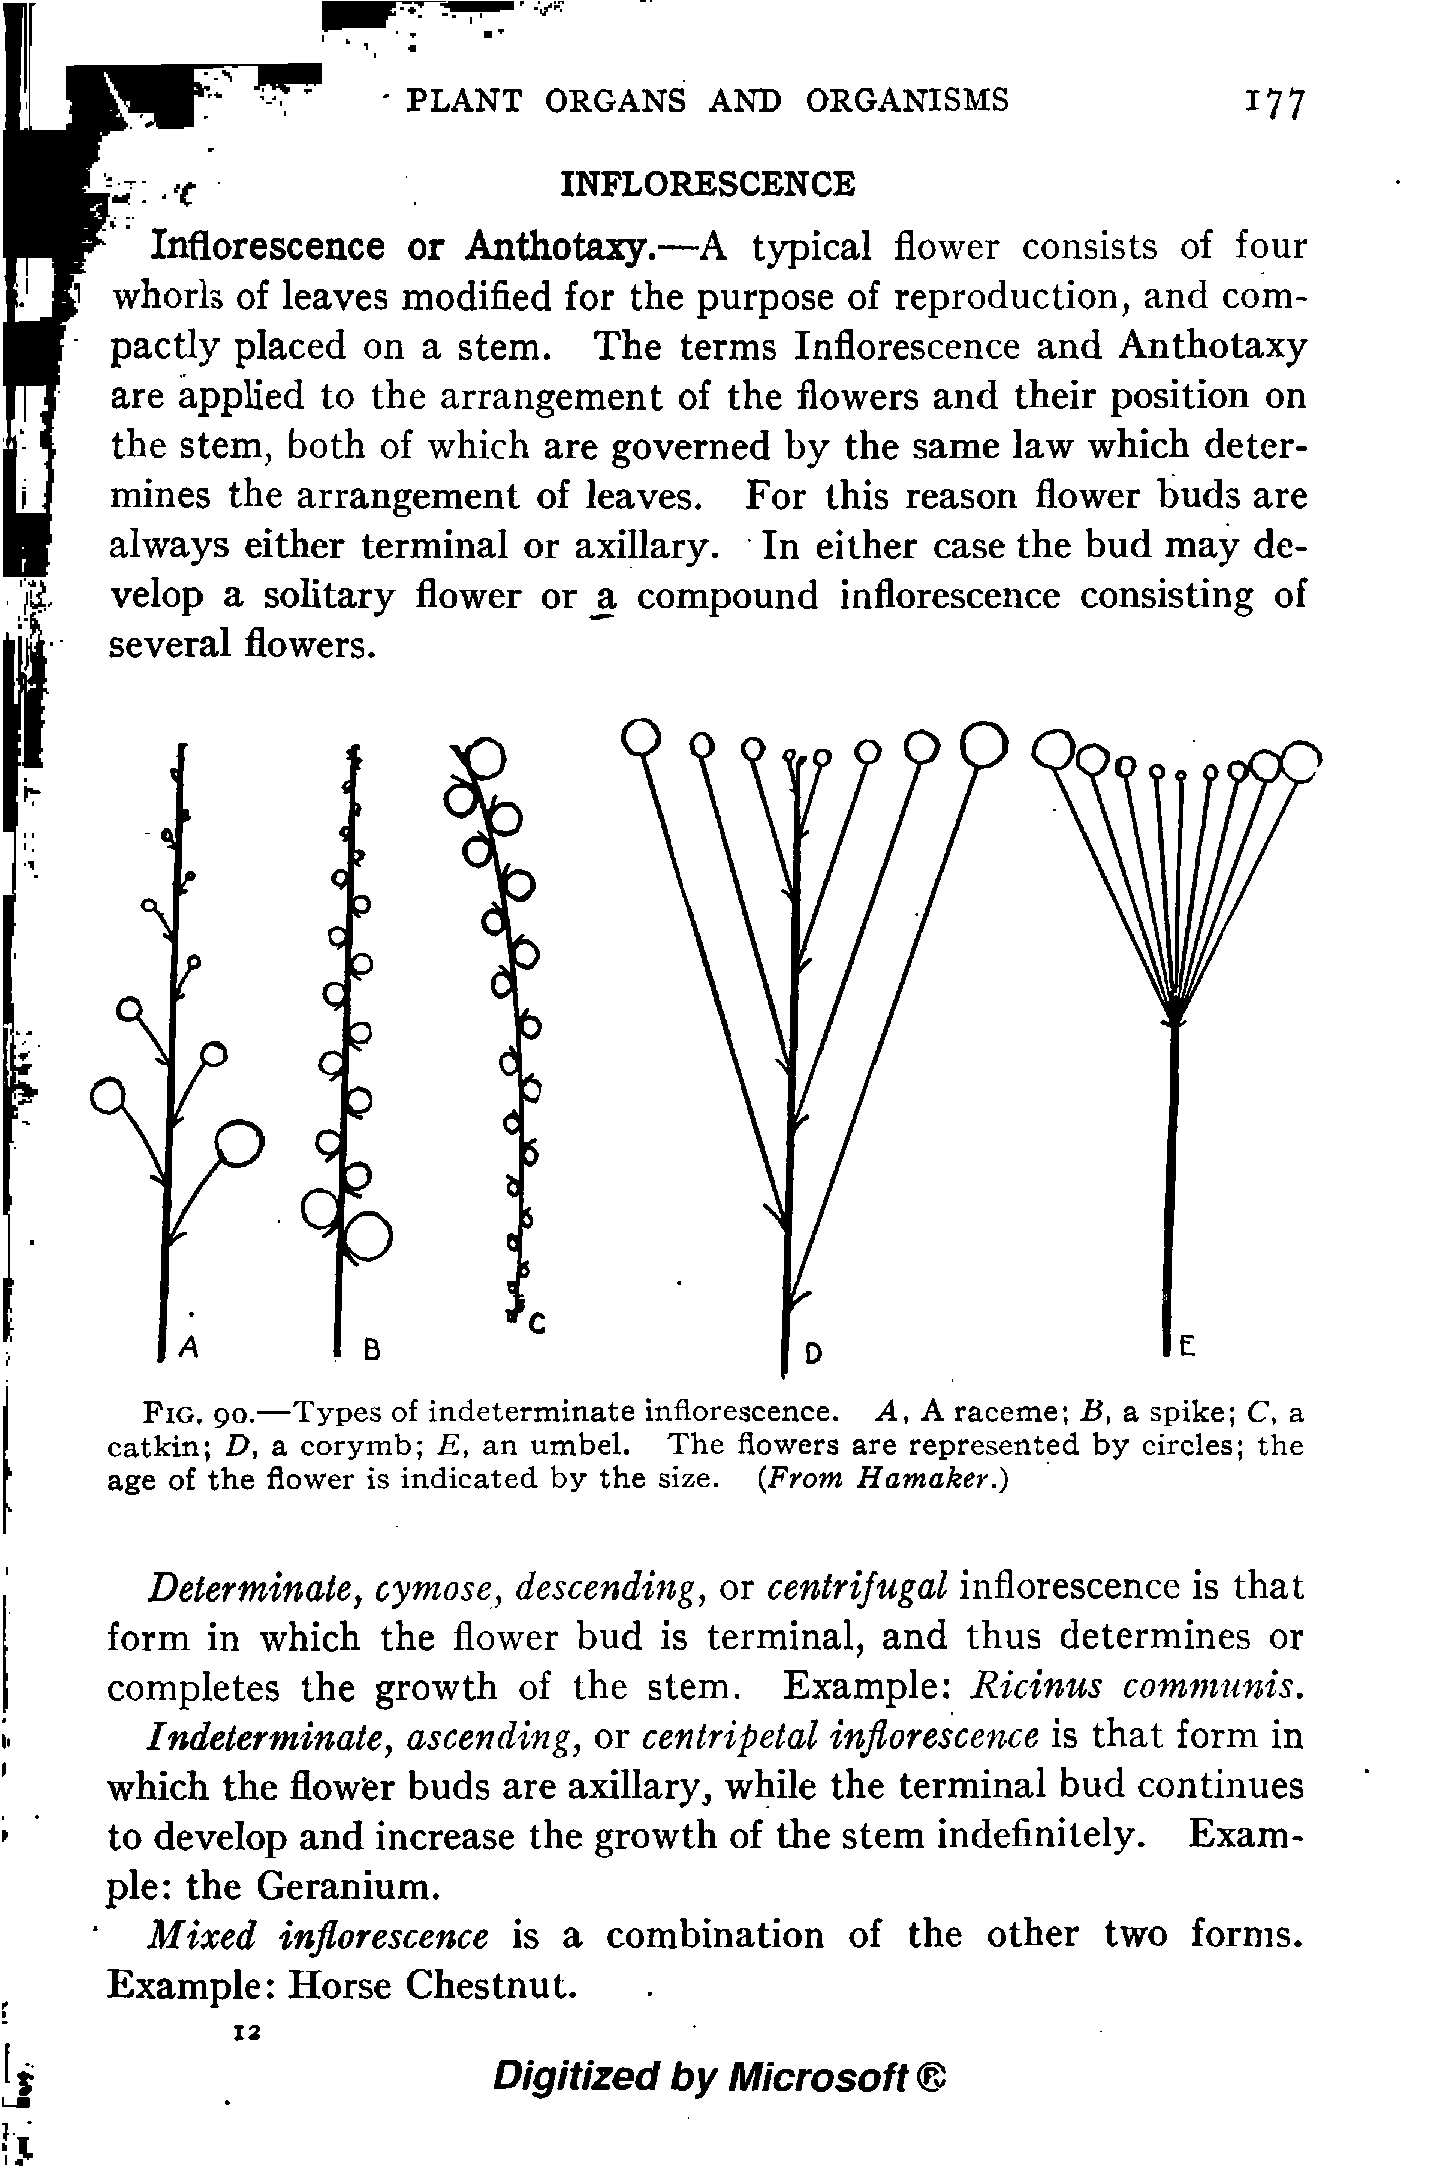 Fig. 90.—Types of indeterminate inflorescence. A, A raceme B, a spike C, a catkin D, a corymb E, an umbel. The flowers are represented by circles the age of the flower is indicated by the size. From Hamaker.)...